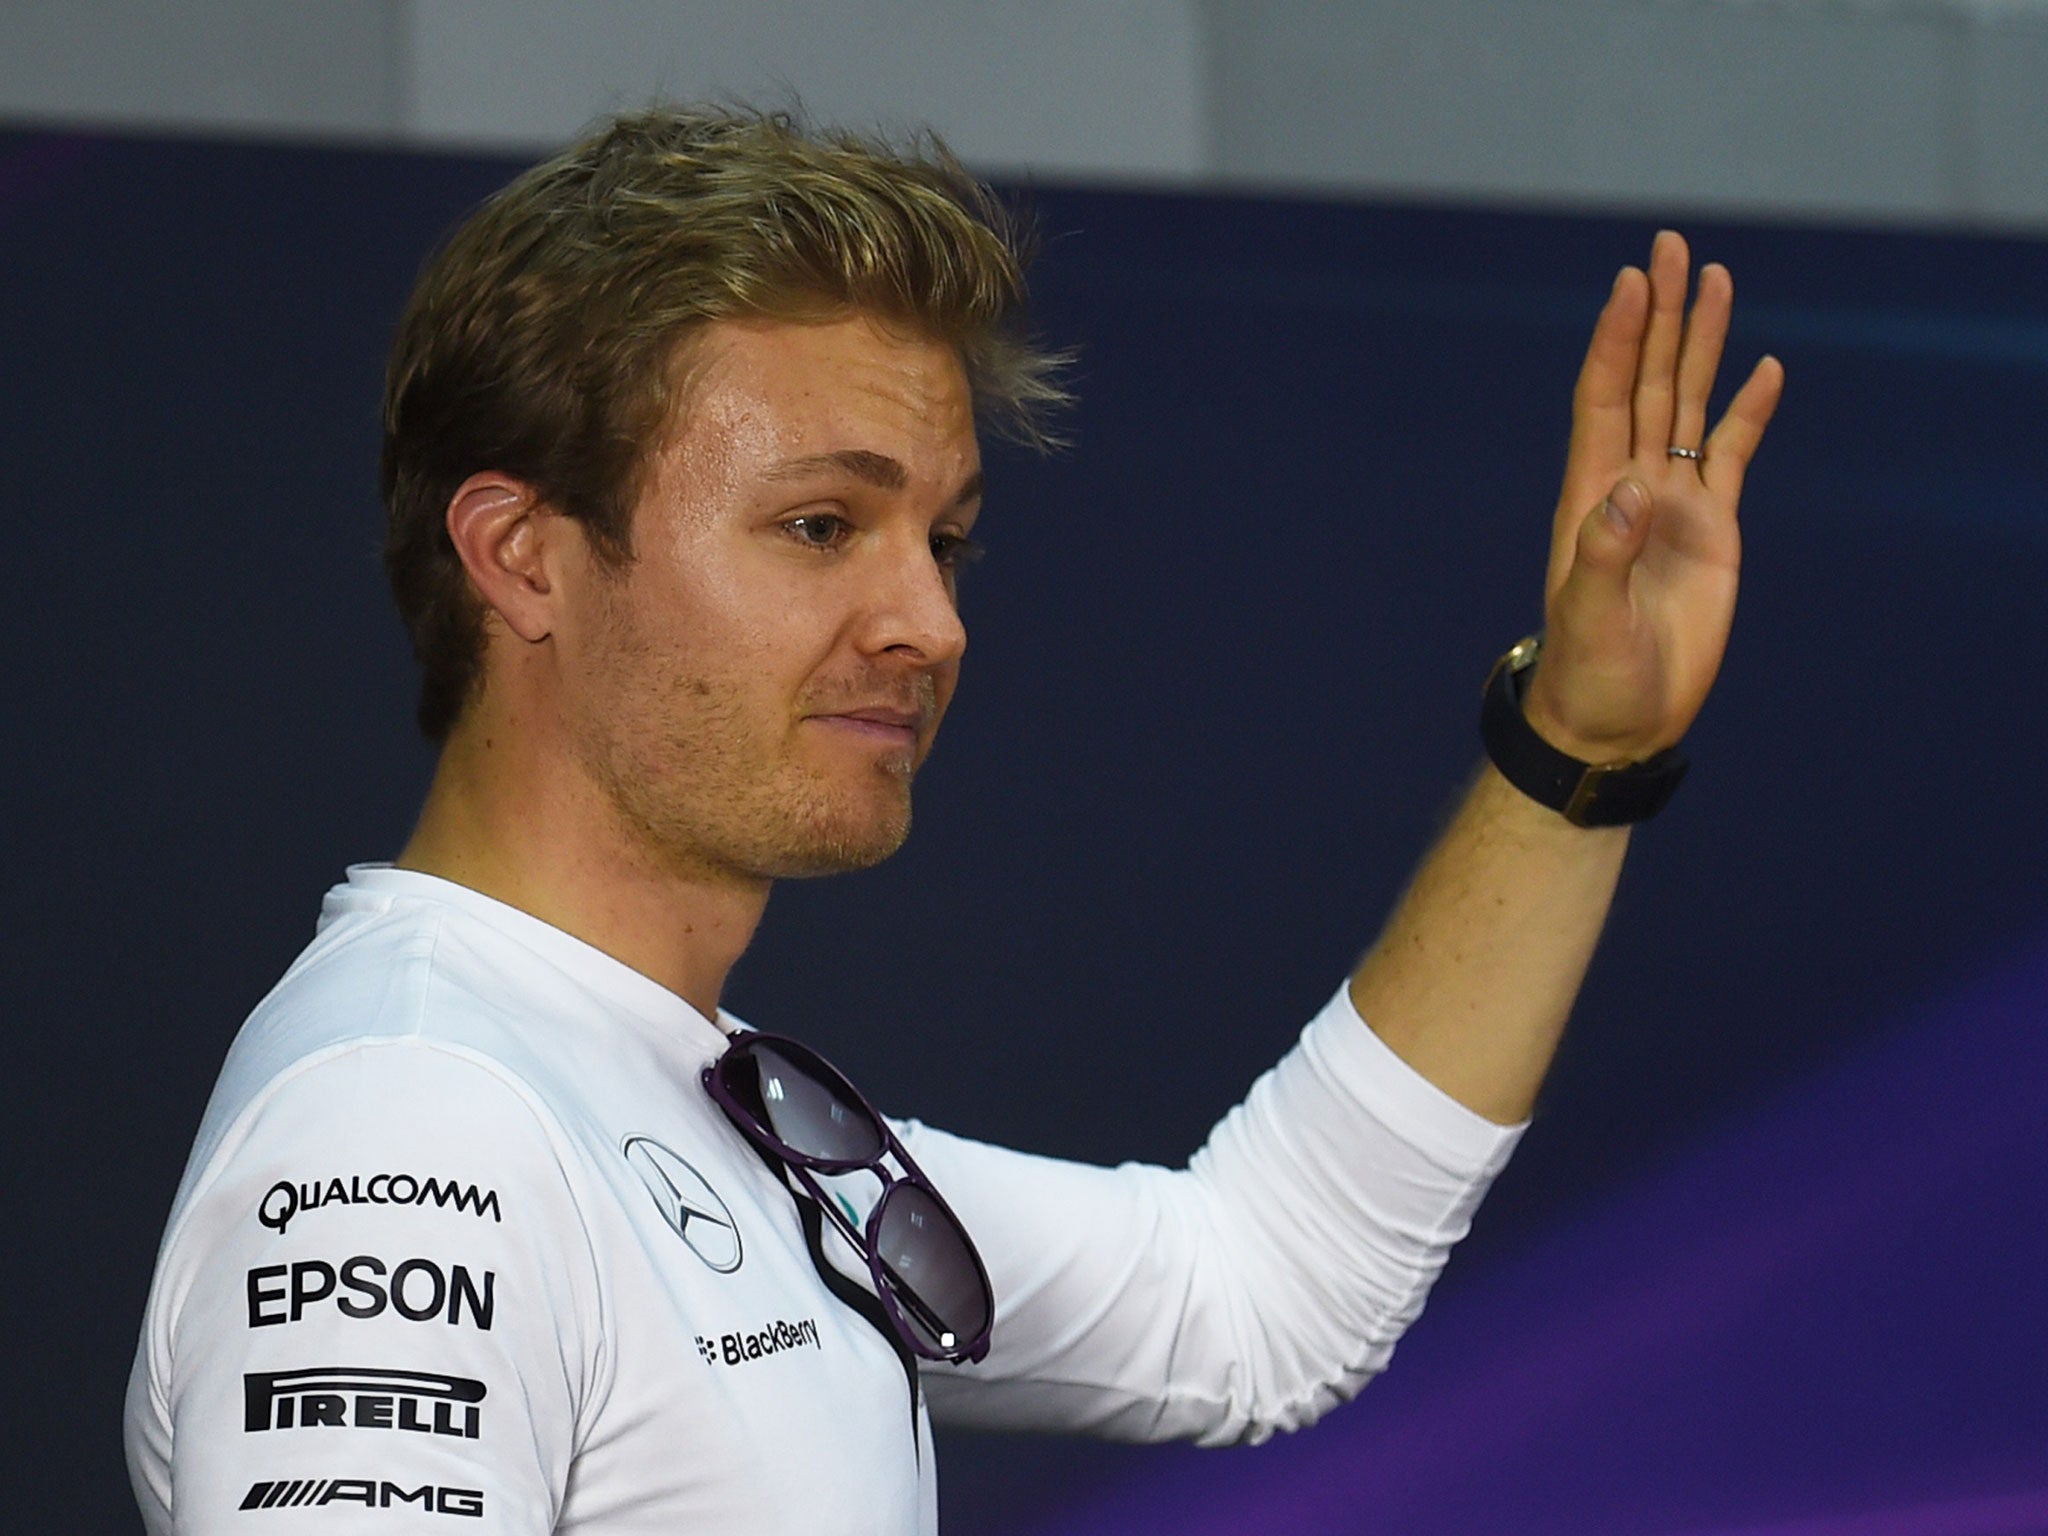 Malaysian Grand Prix 15 Nico Rosberg Reveals He Sticks A Sanitary Towel To His Forehead To Cope With Extreme Temperatures The Independent